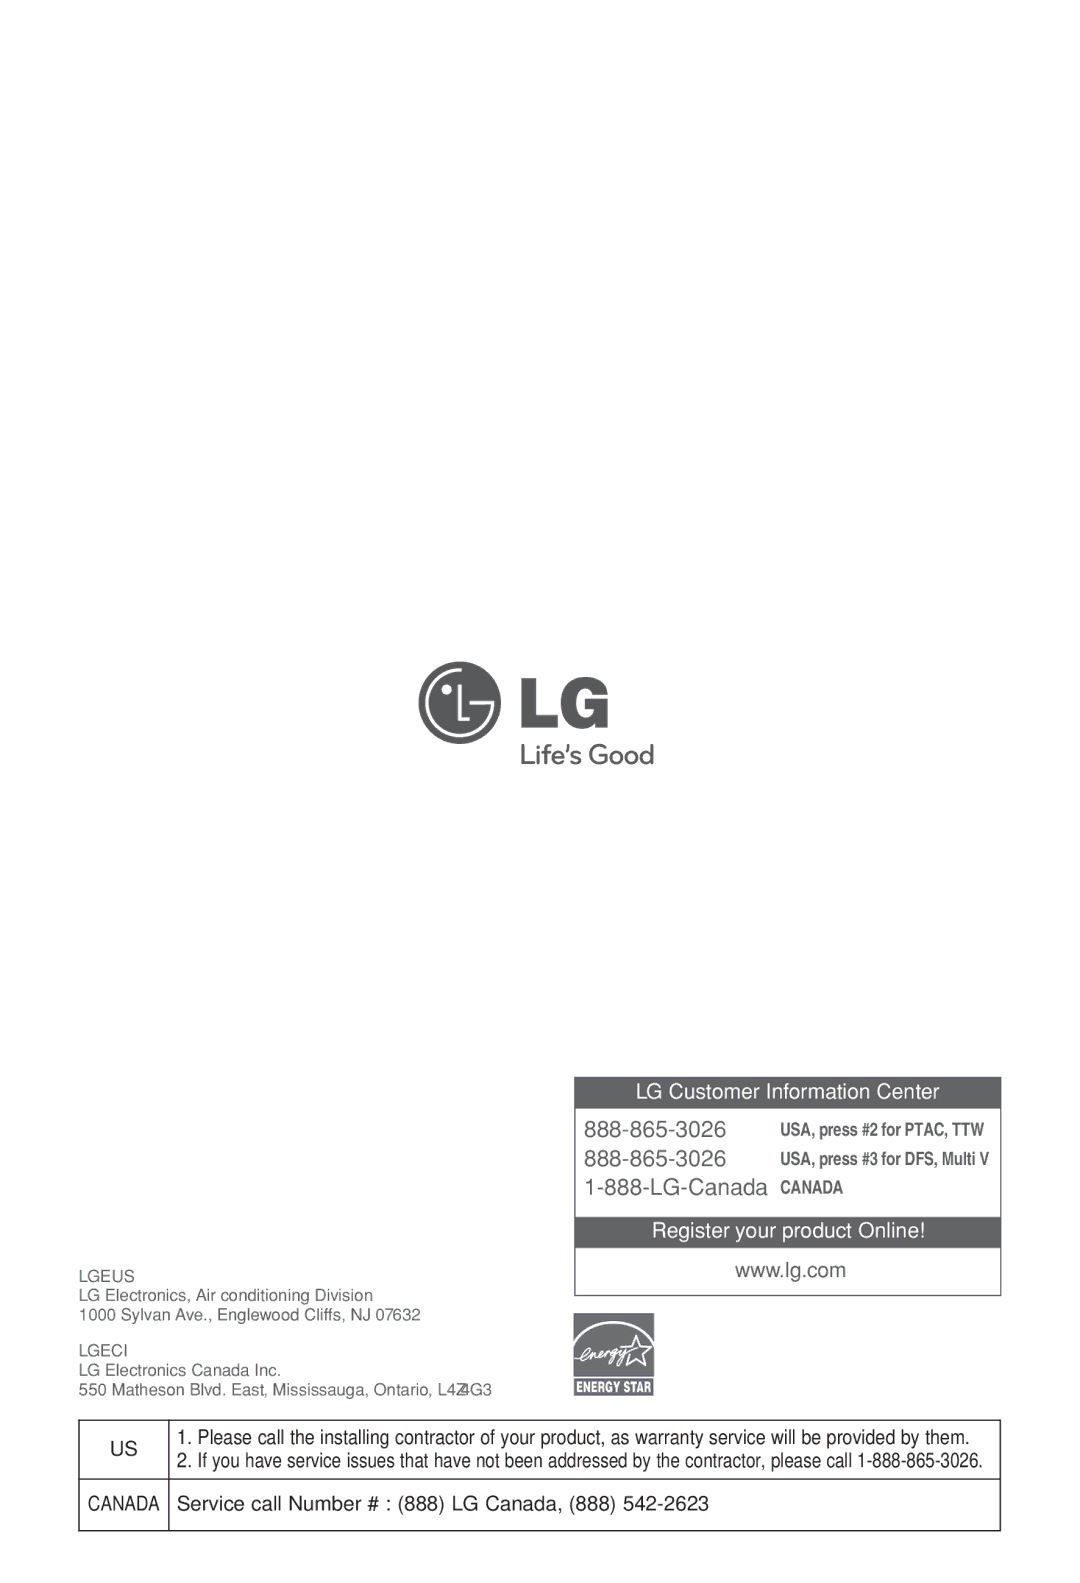 LG Electronics HV2, LSN, LSU-HSV2 owner manual LG-Canada Canada, Service call Number # 888 LG Canada, 888 